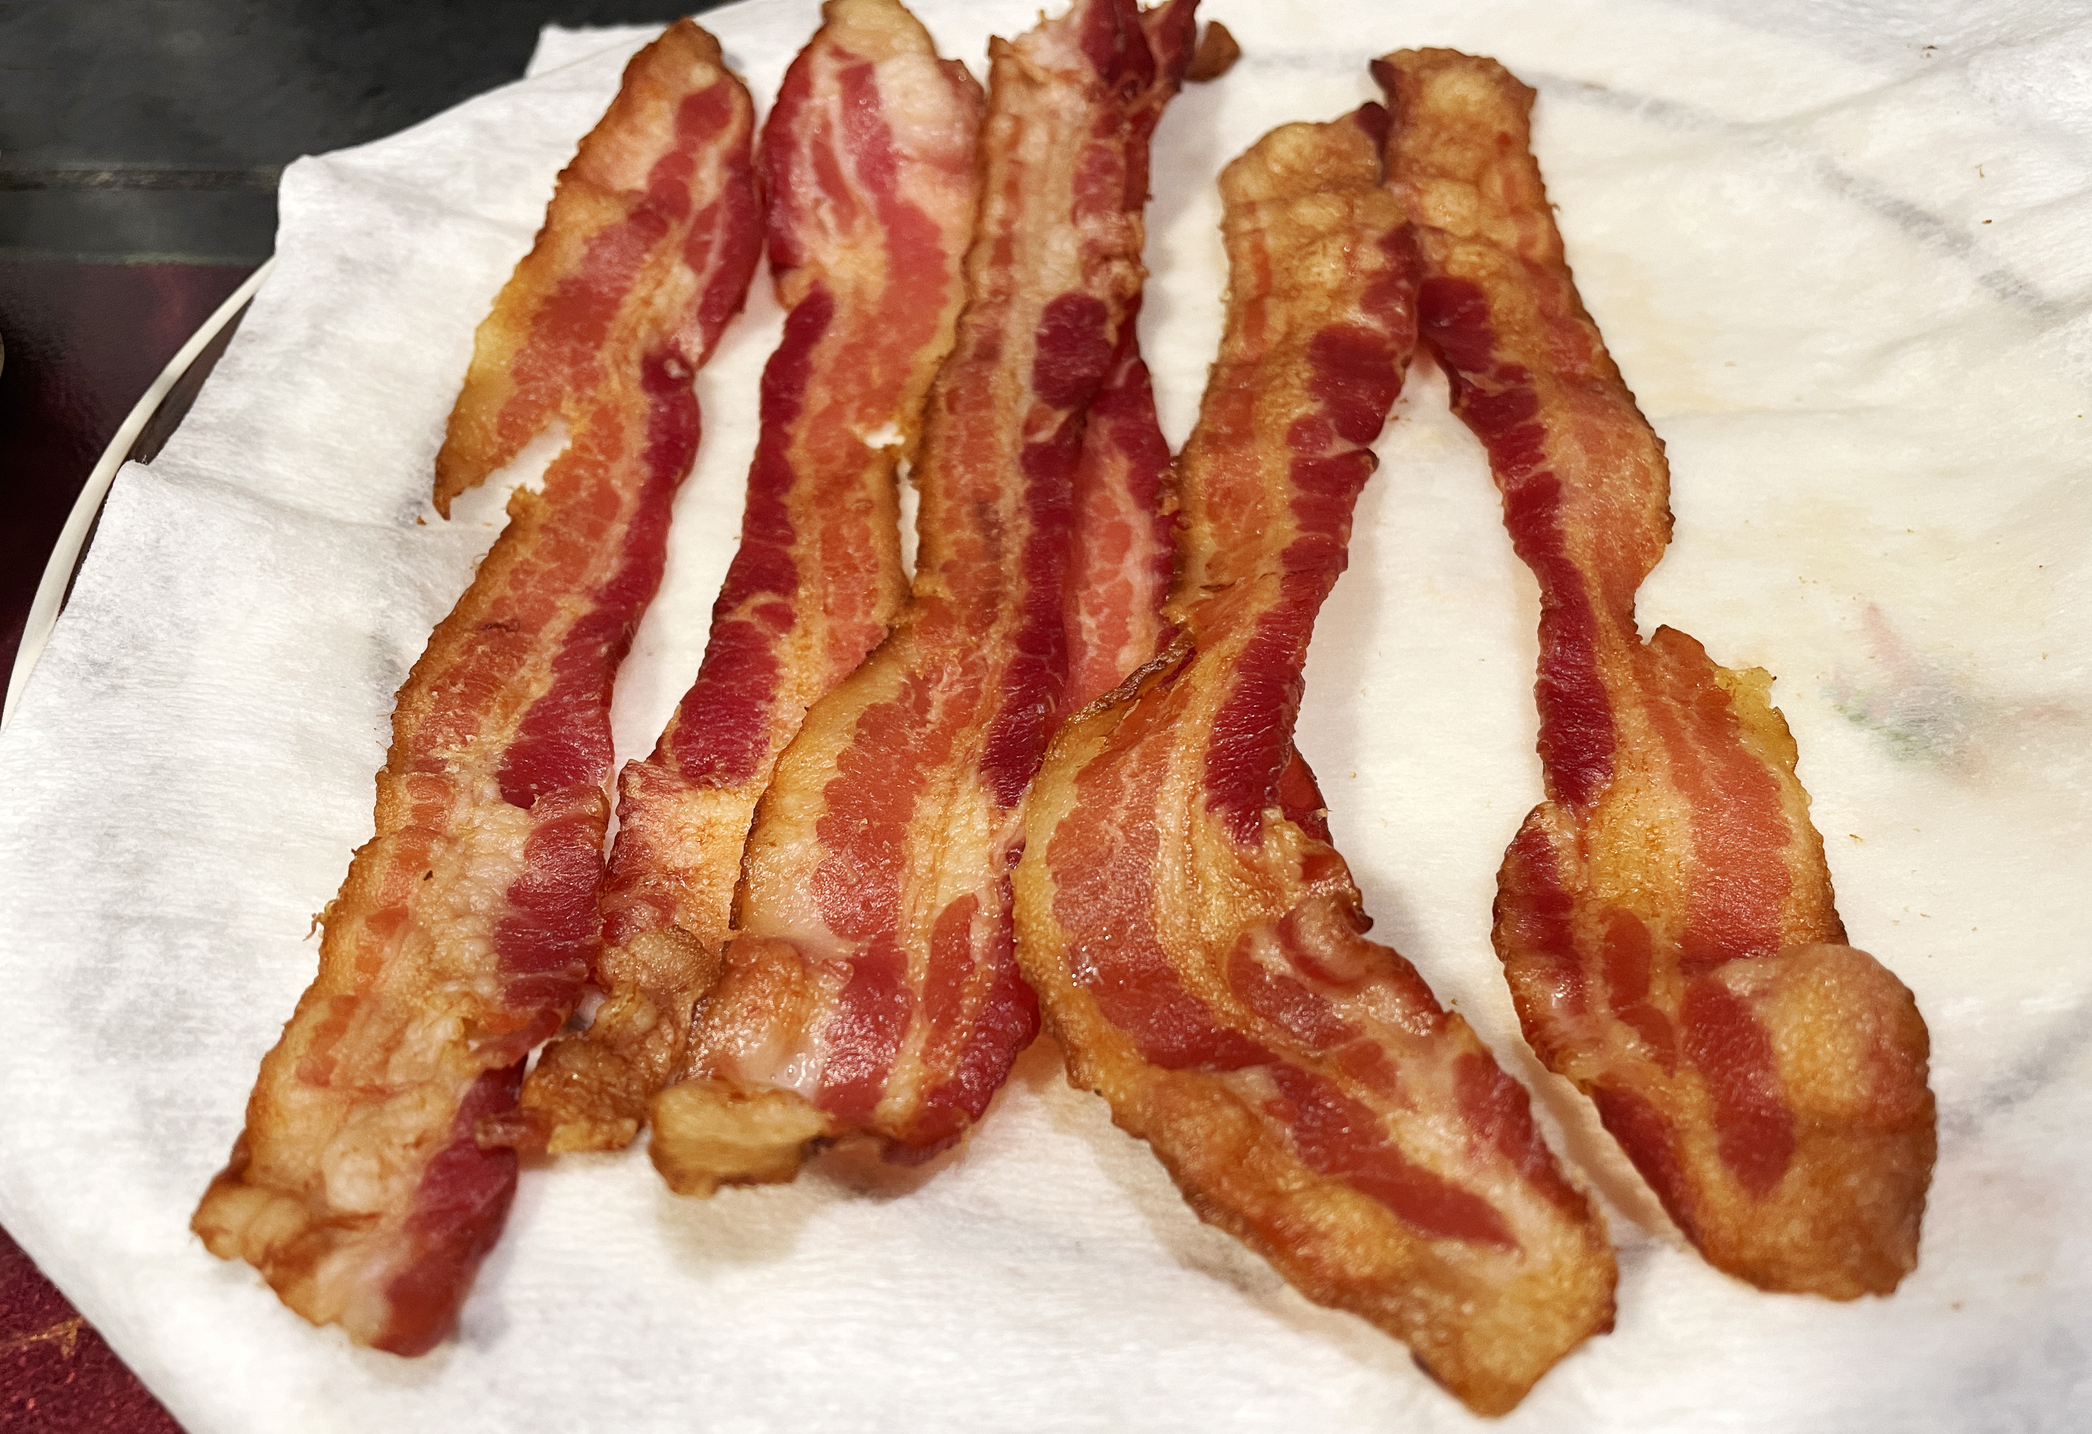 Several crispy, cooked bacon strips are laid out on a paper towel